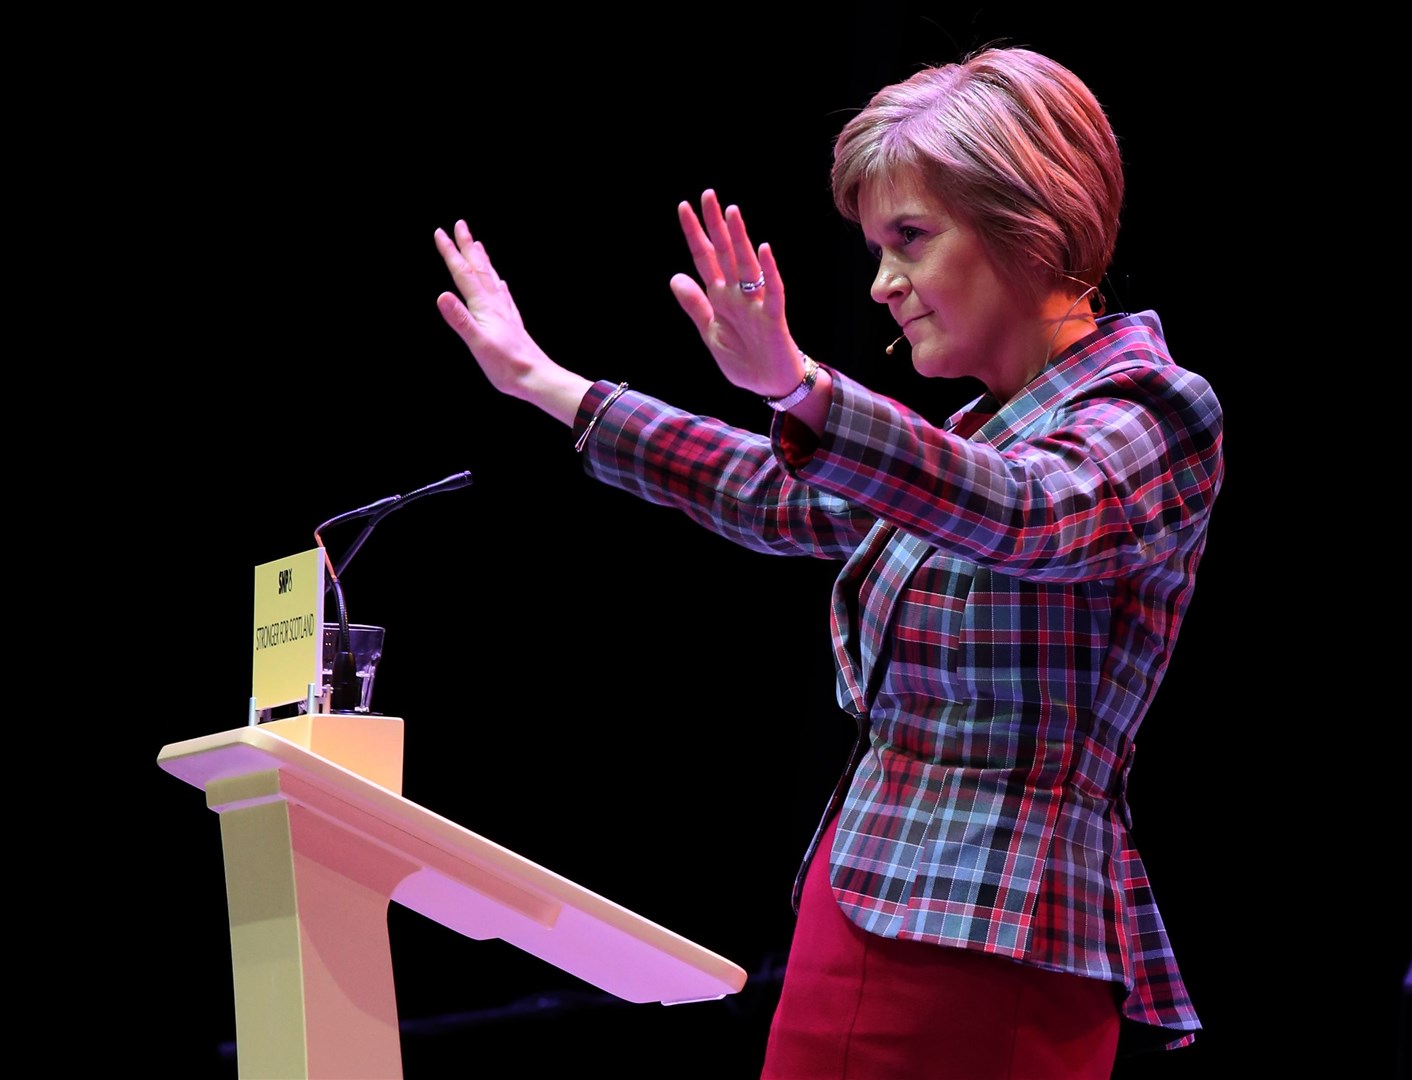 Nicola Sturgeon speaks at a rally at the SSE Hydro in Glasgow in 2014 (Andrew Milligan/PA)